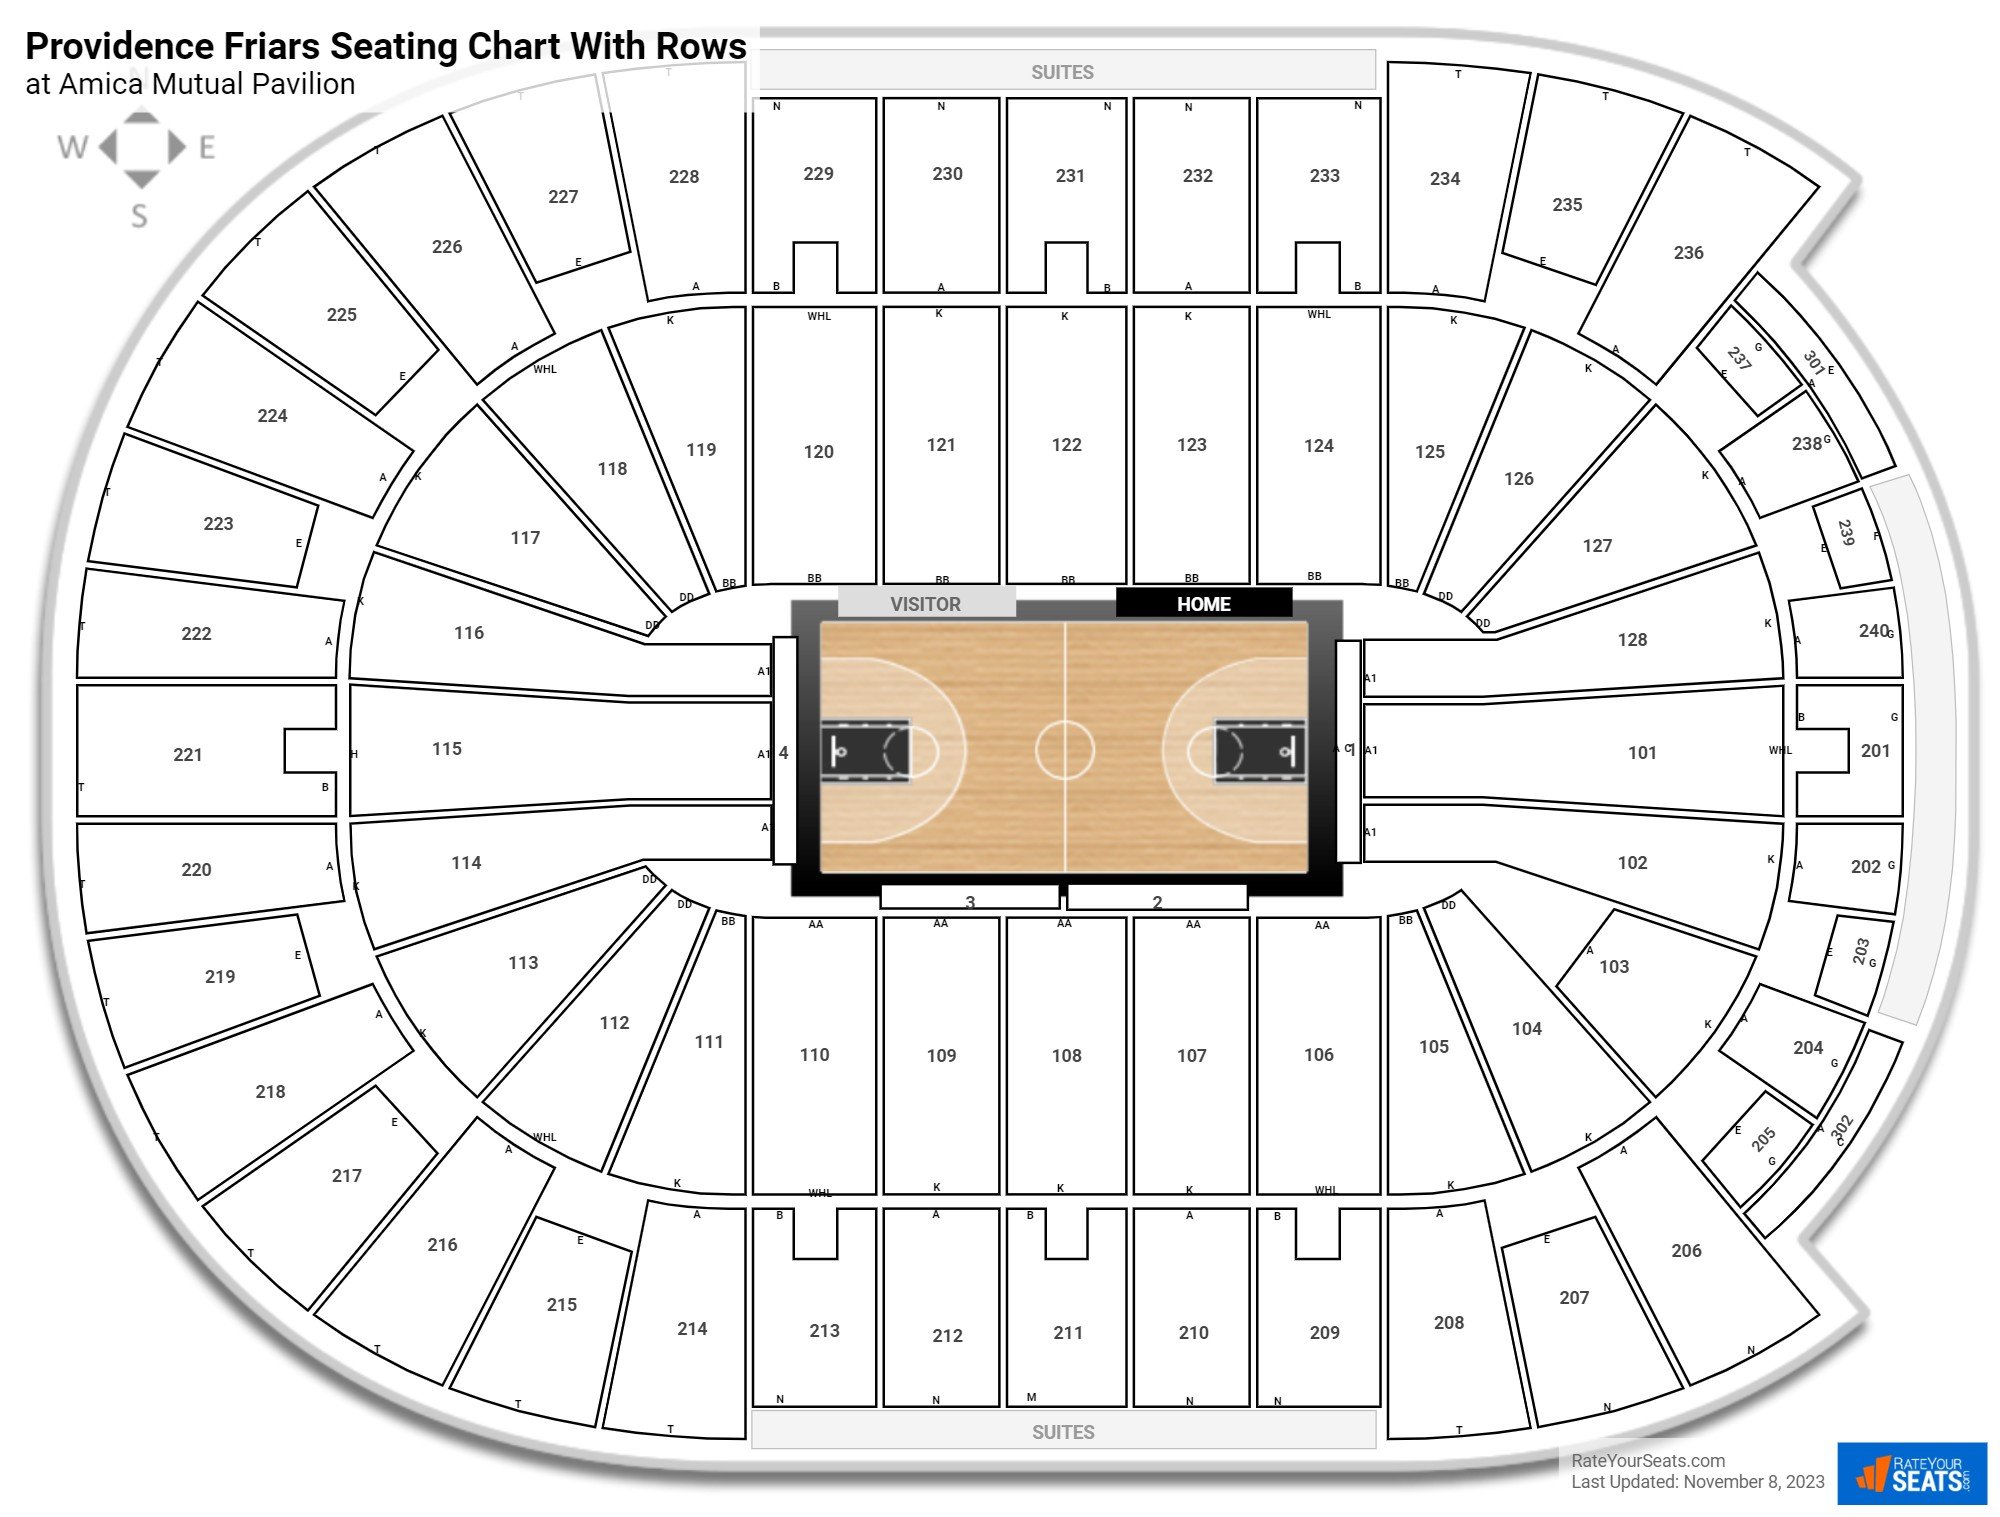 Dunkin Donuts Center seating chart with row numbers